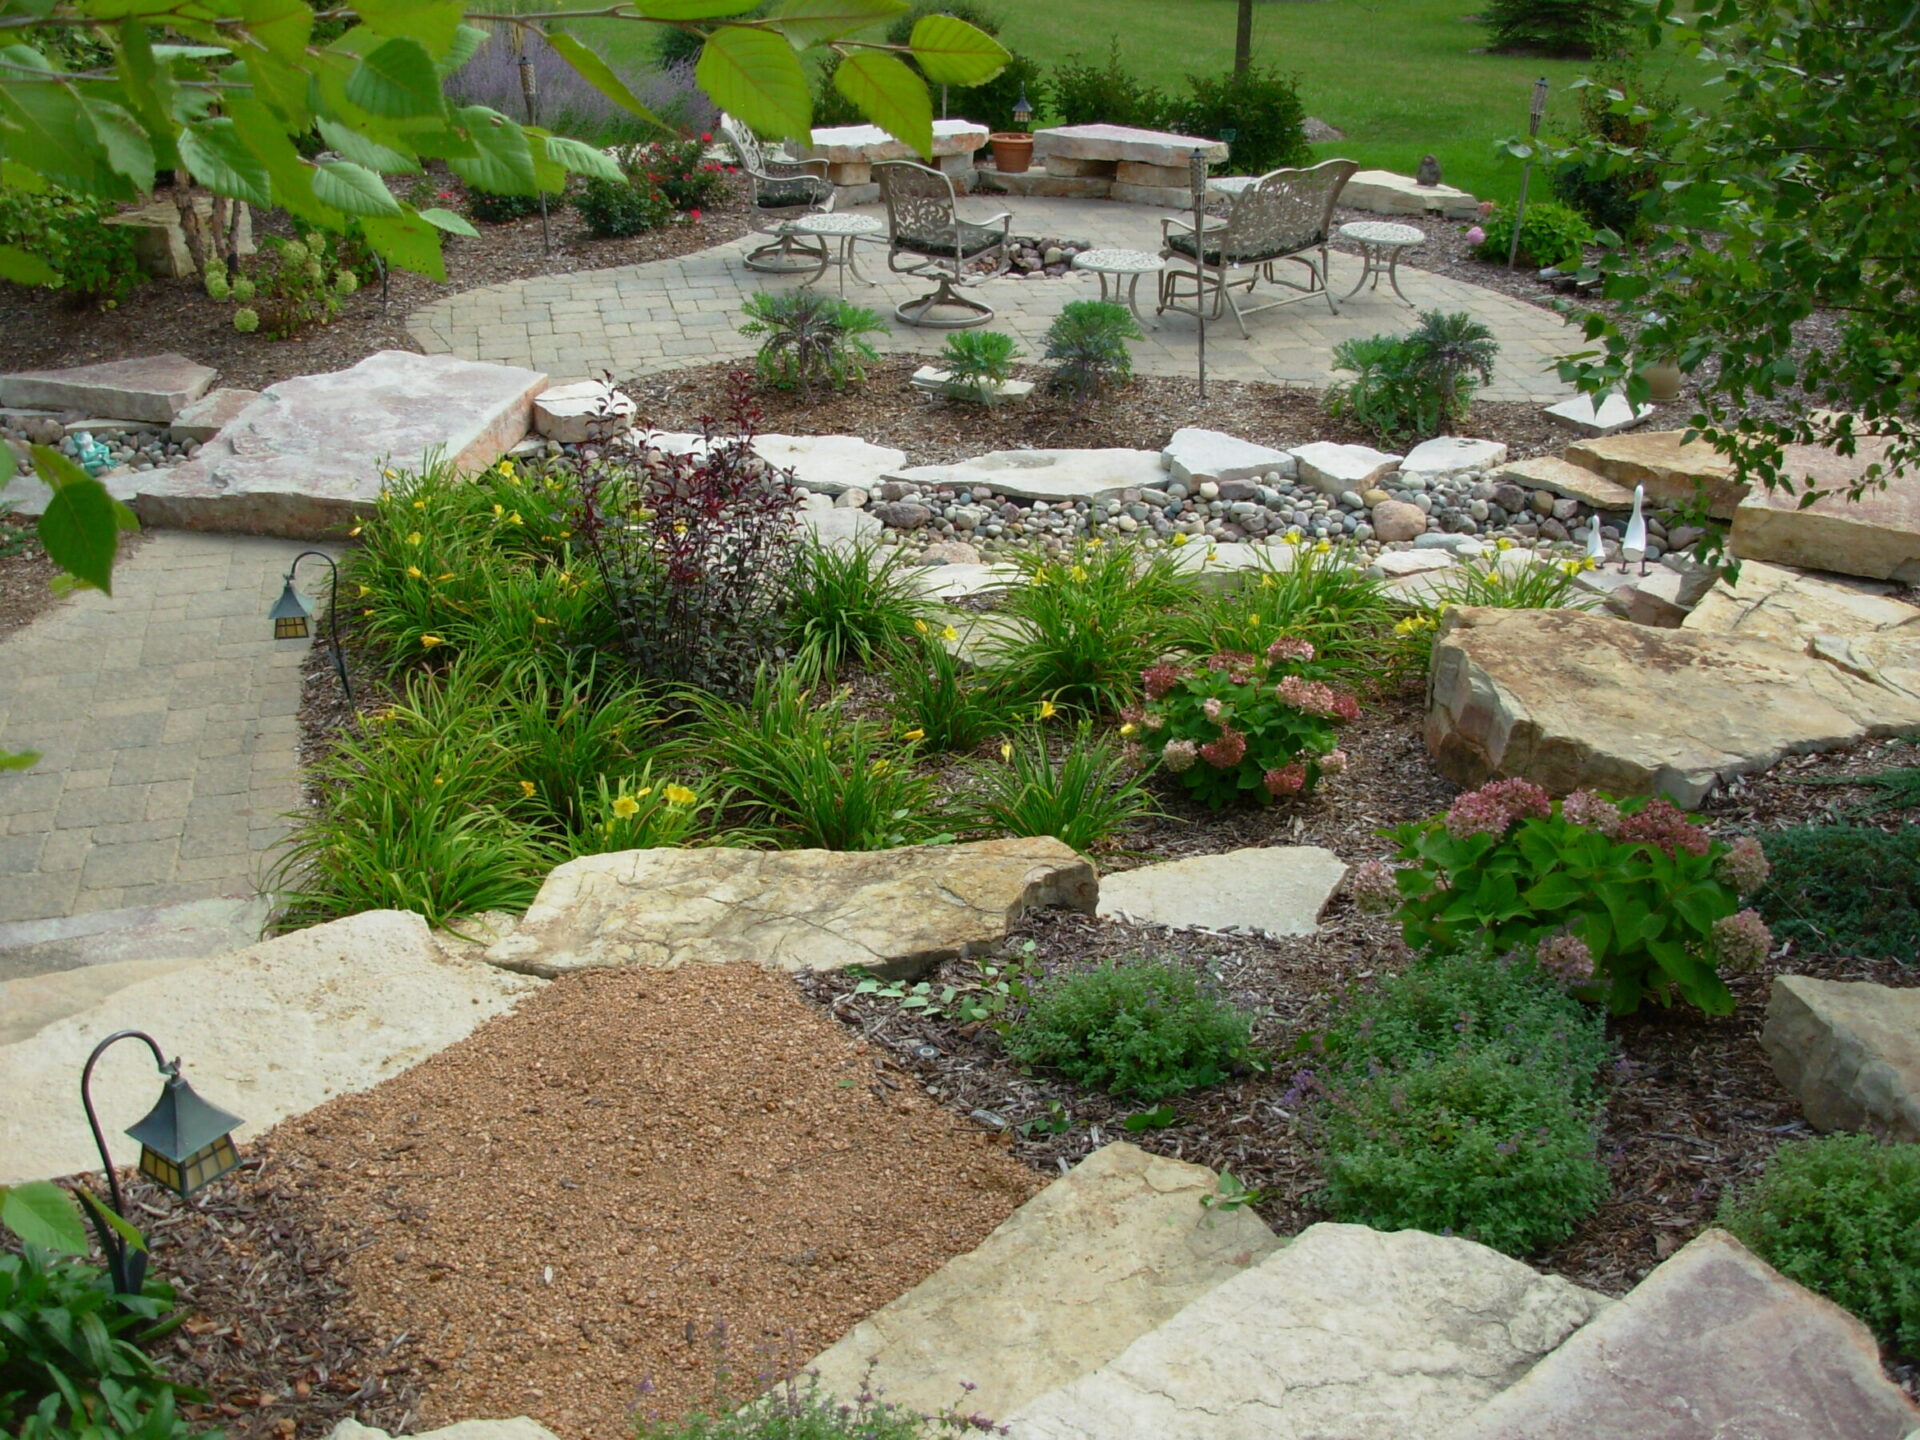 An inviting garden with paved paths, lush plants, decorative stones, outdoor seating, and lanterns, surrounded by natural landscaping elements.